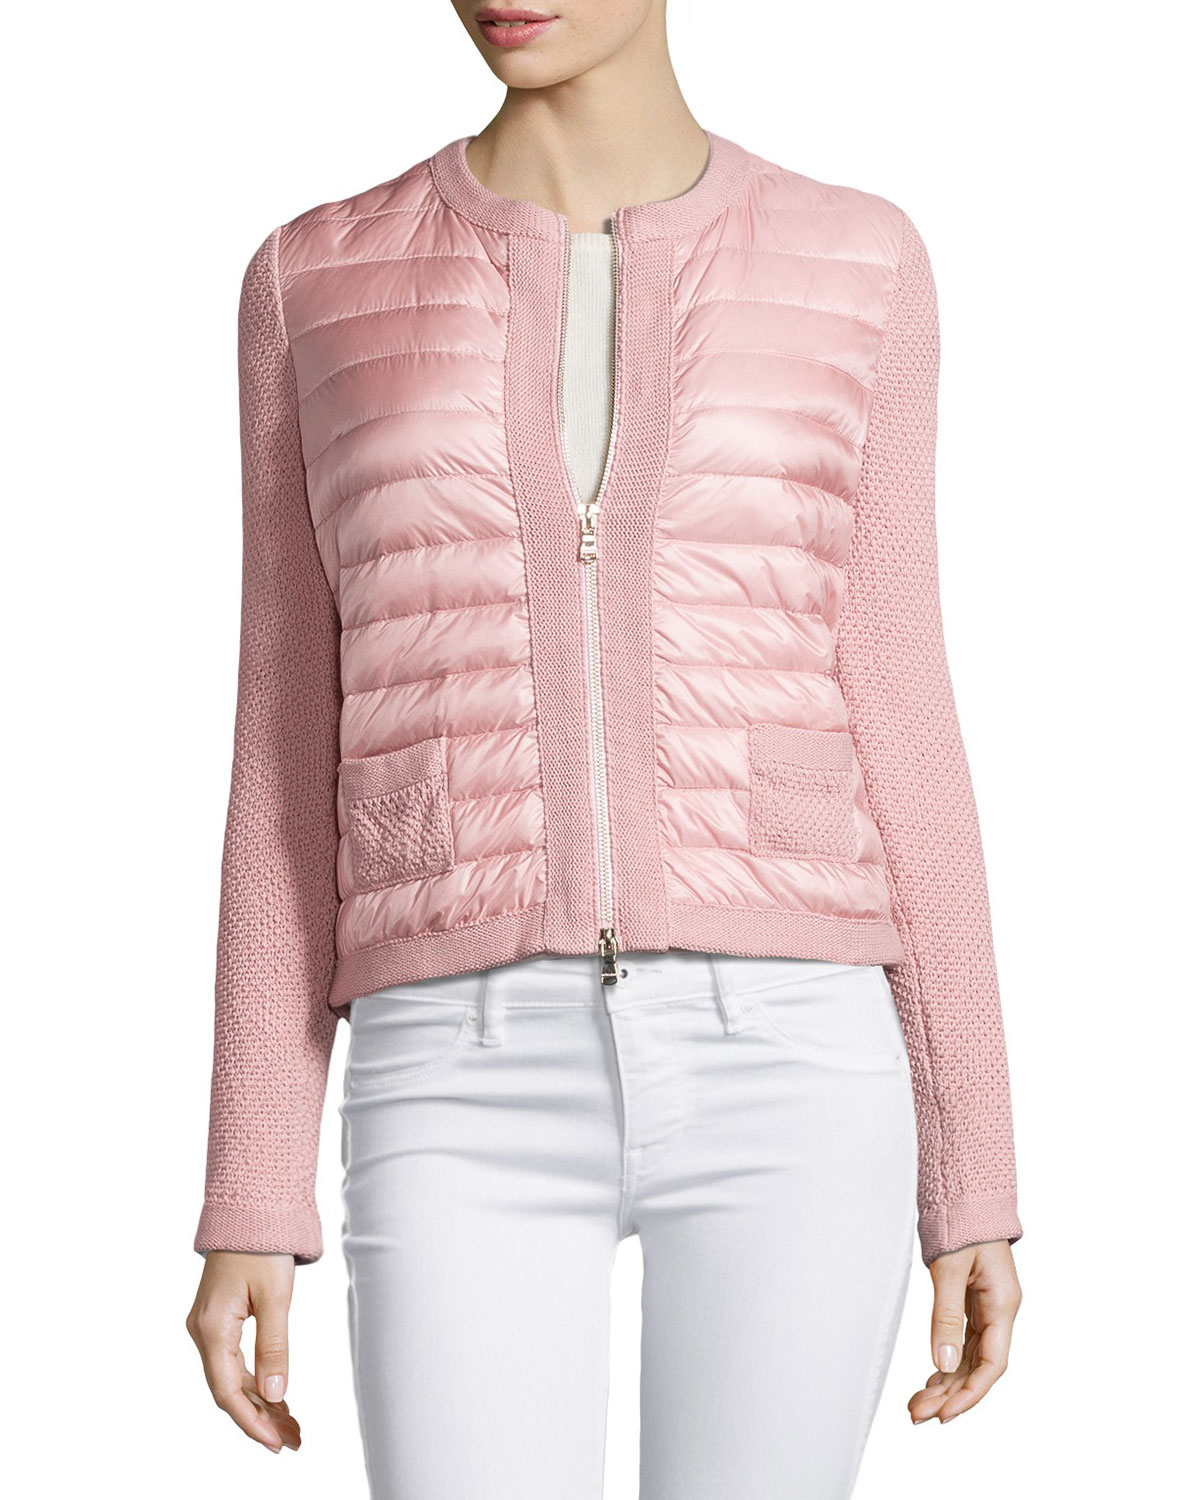 Lyst - Moncler Zip-front Puffer Cardigan in Pink